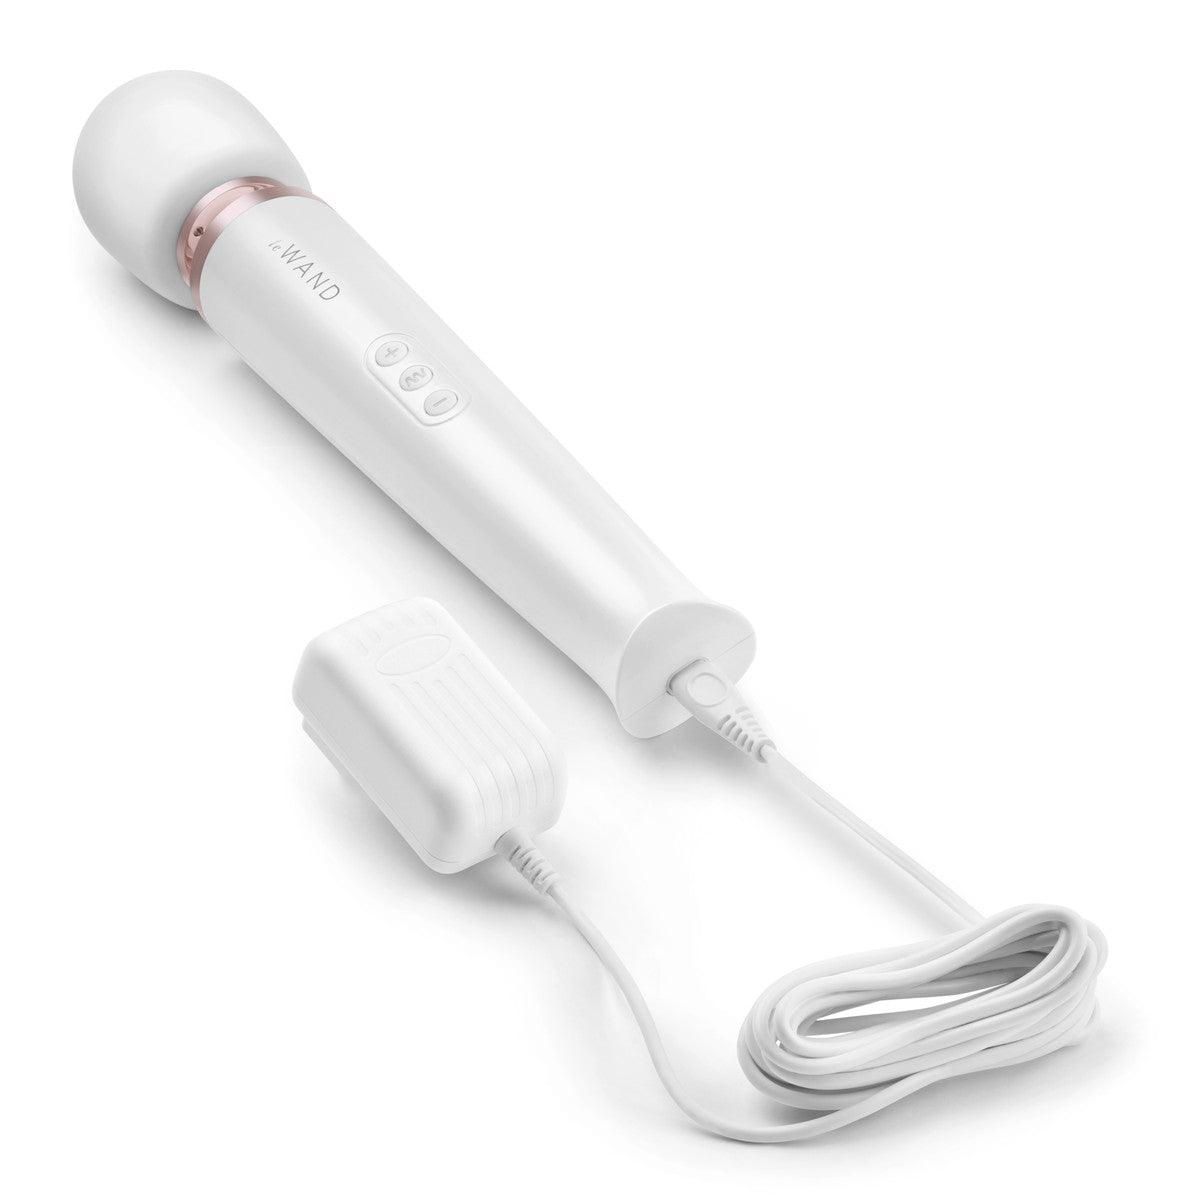 Le Wand Pearl White Rechargeable Massager